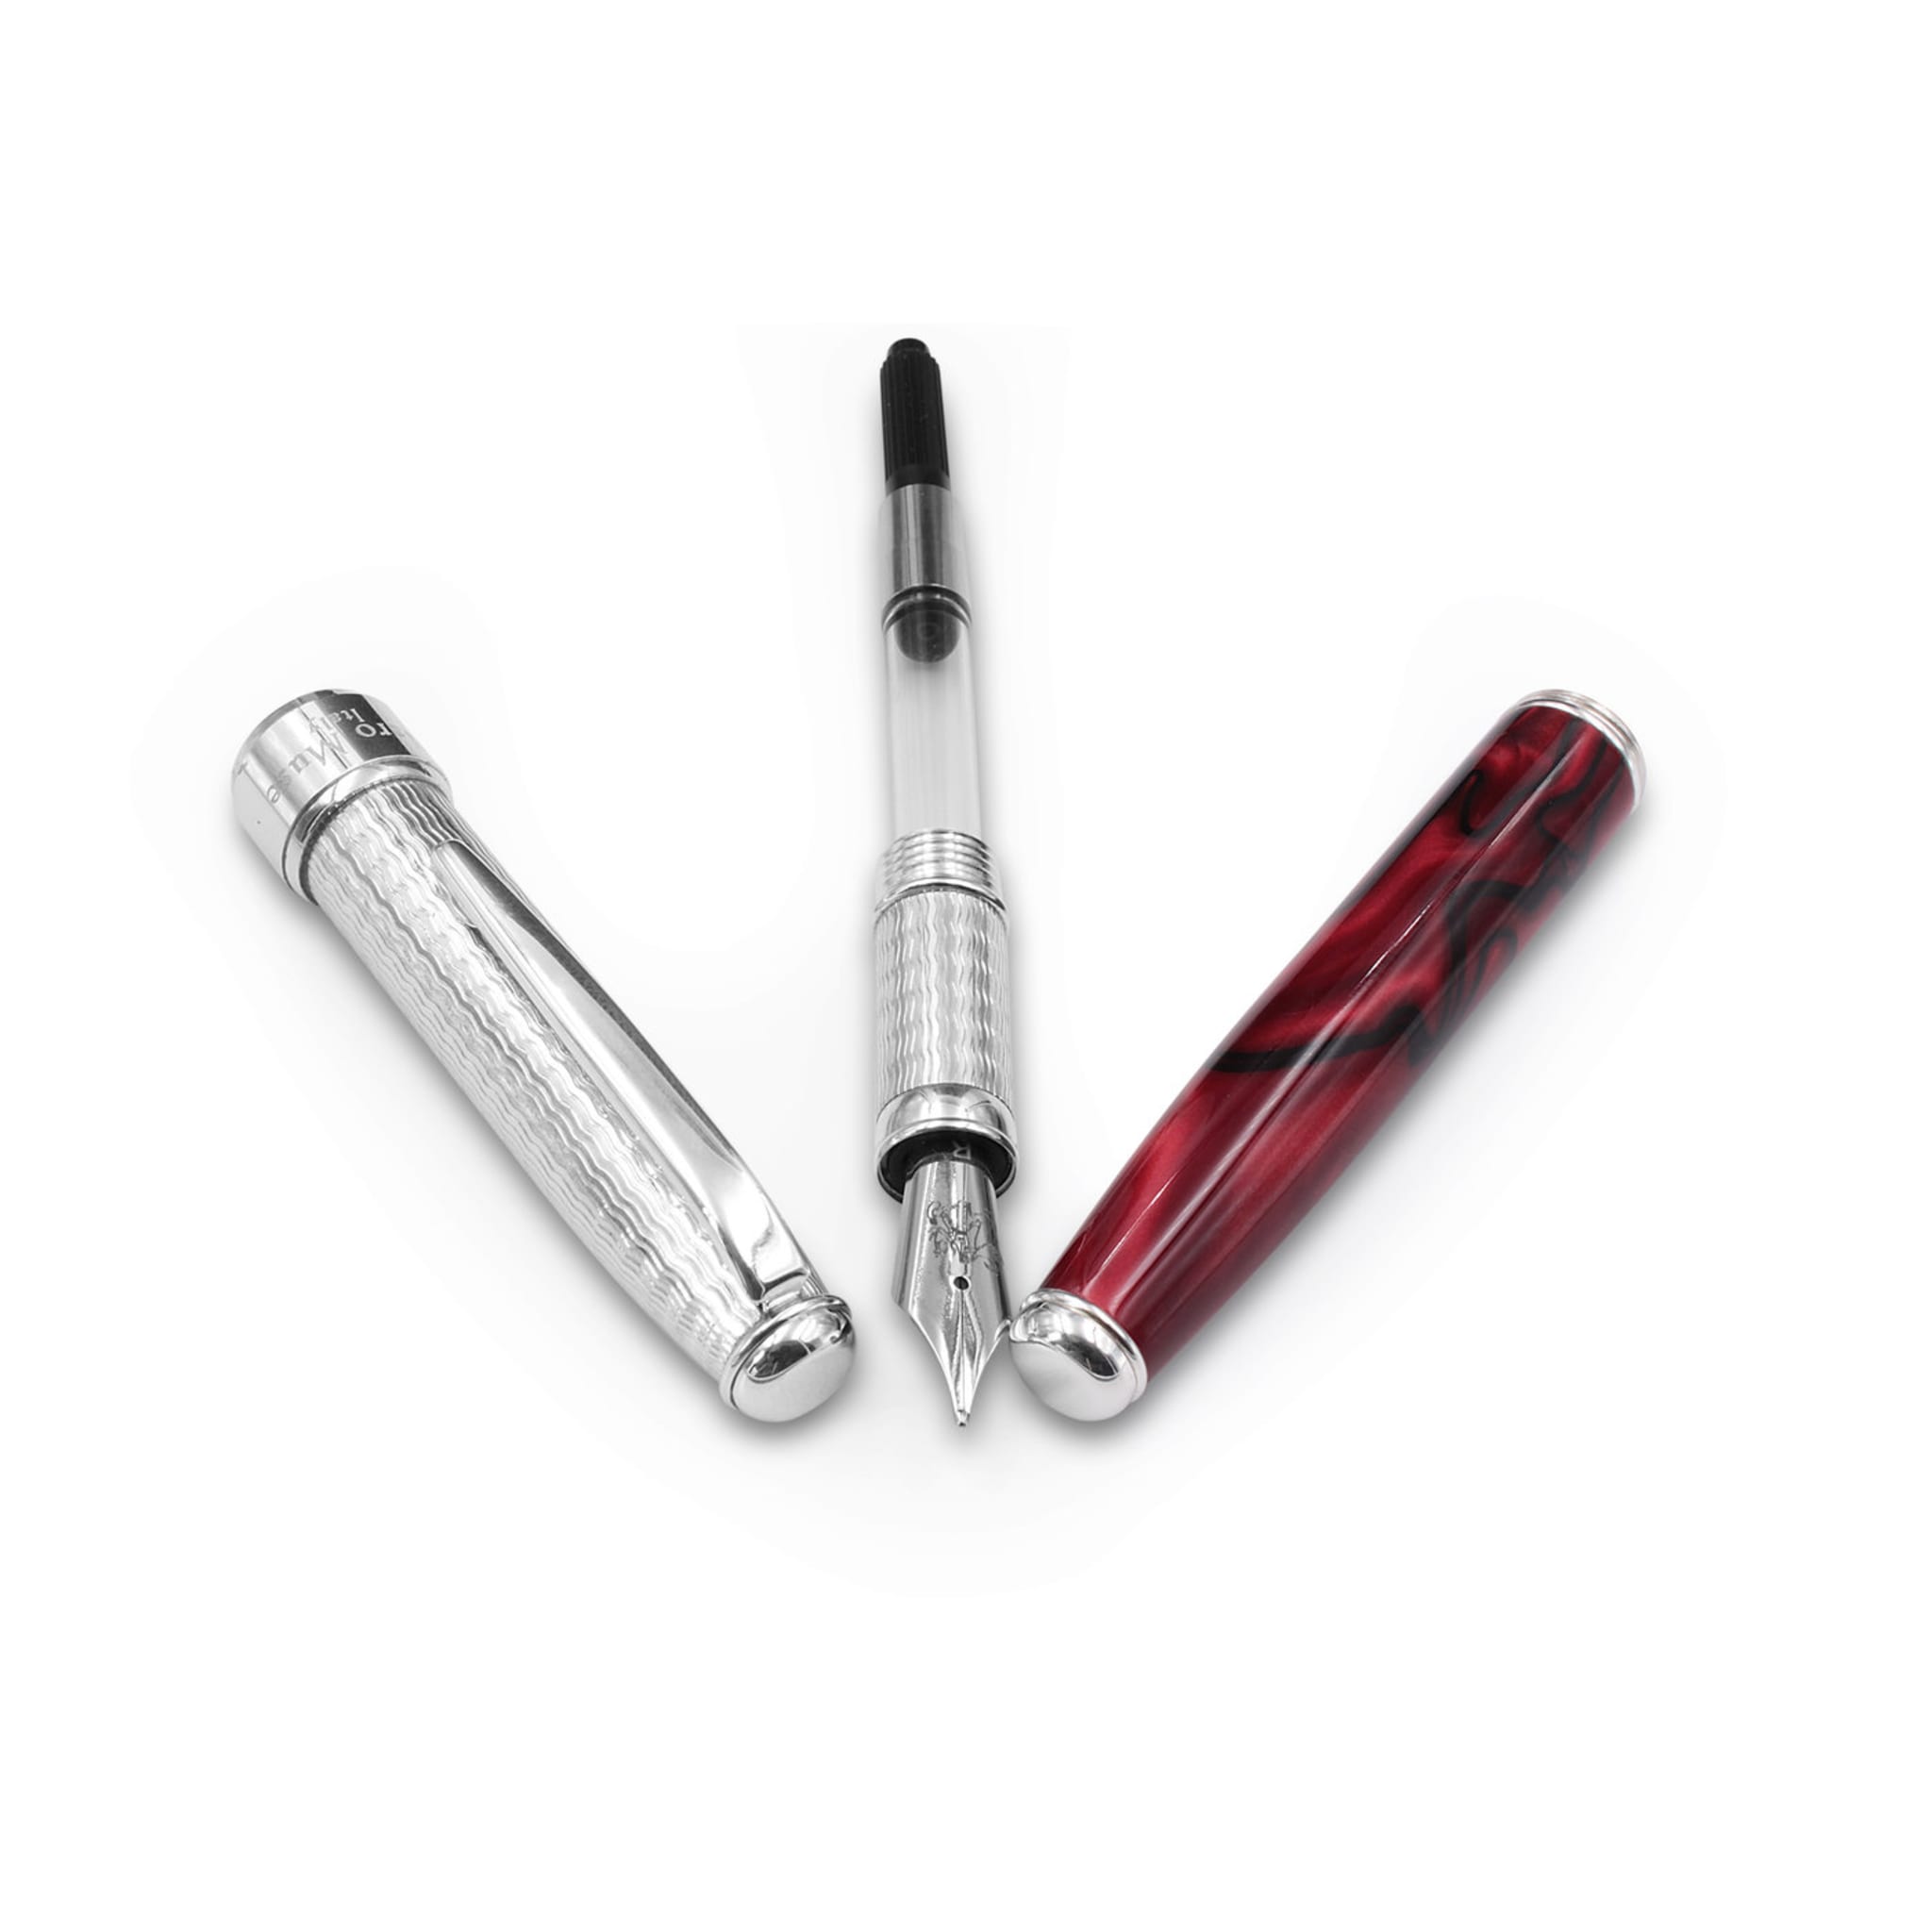 Silver and Burgundy Resin Fountain Pen - Alternative view 2